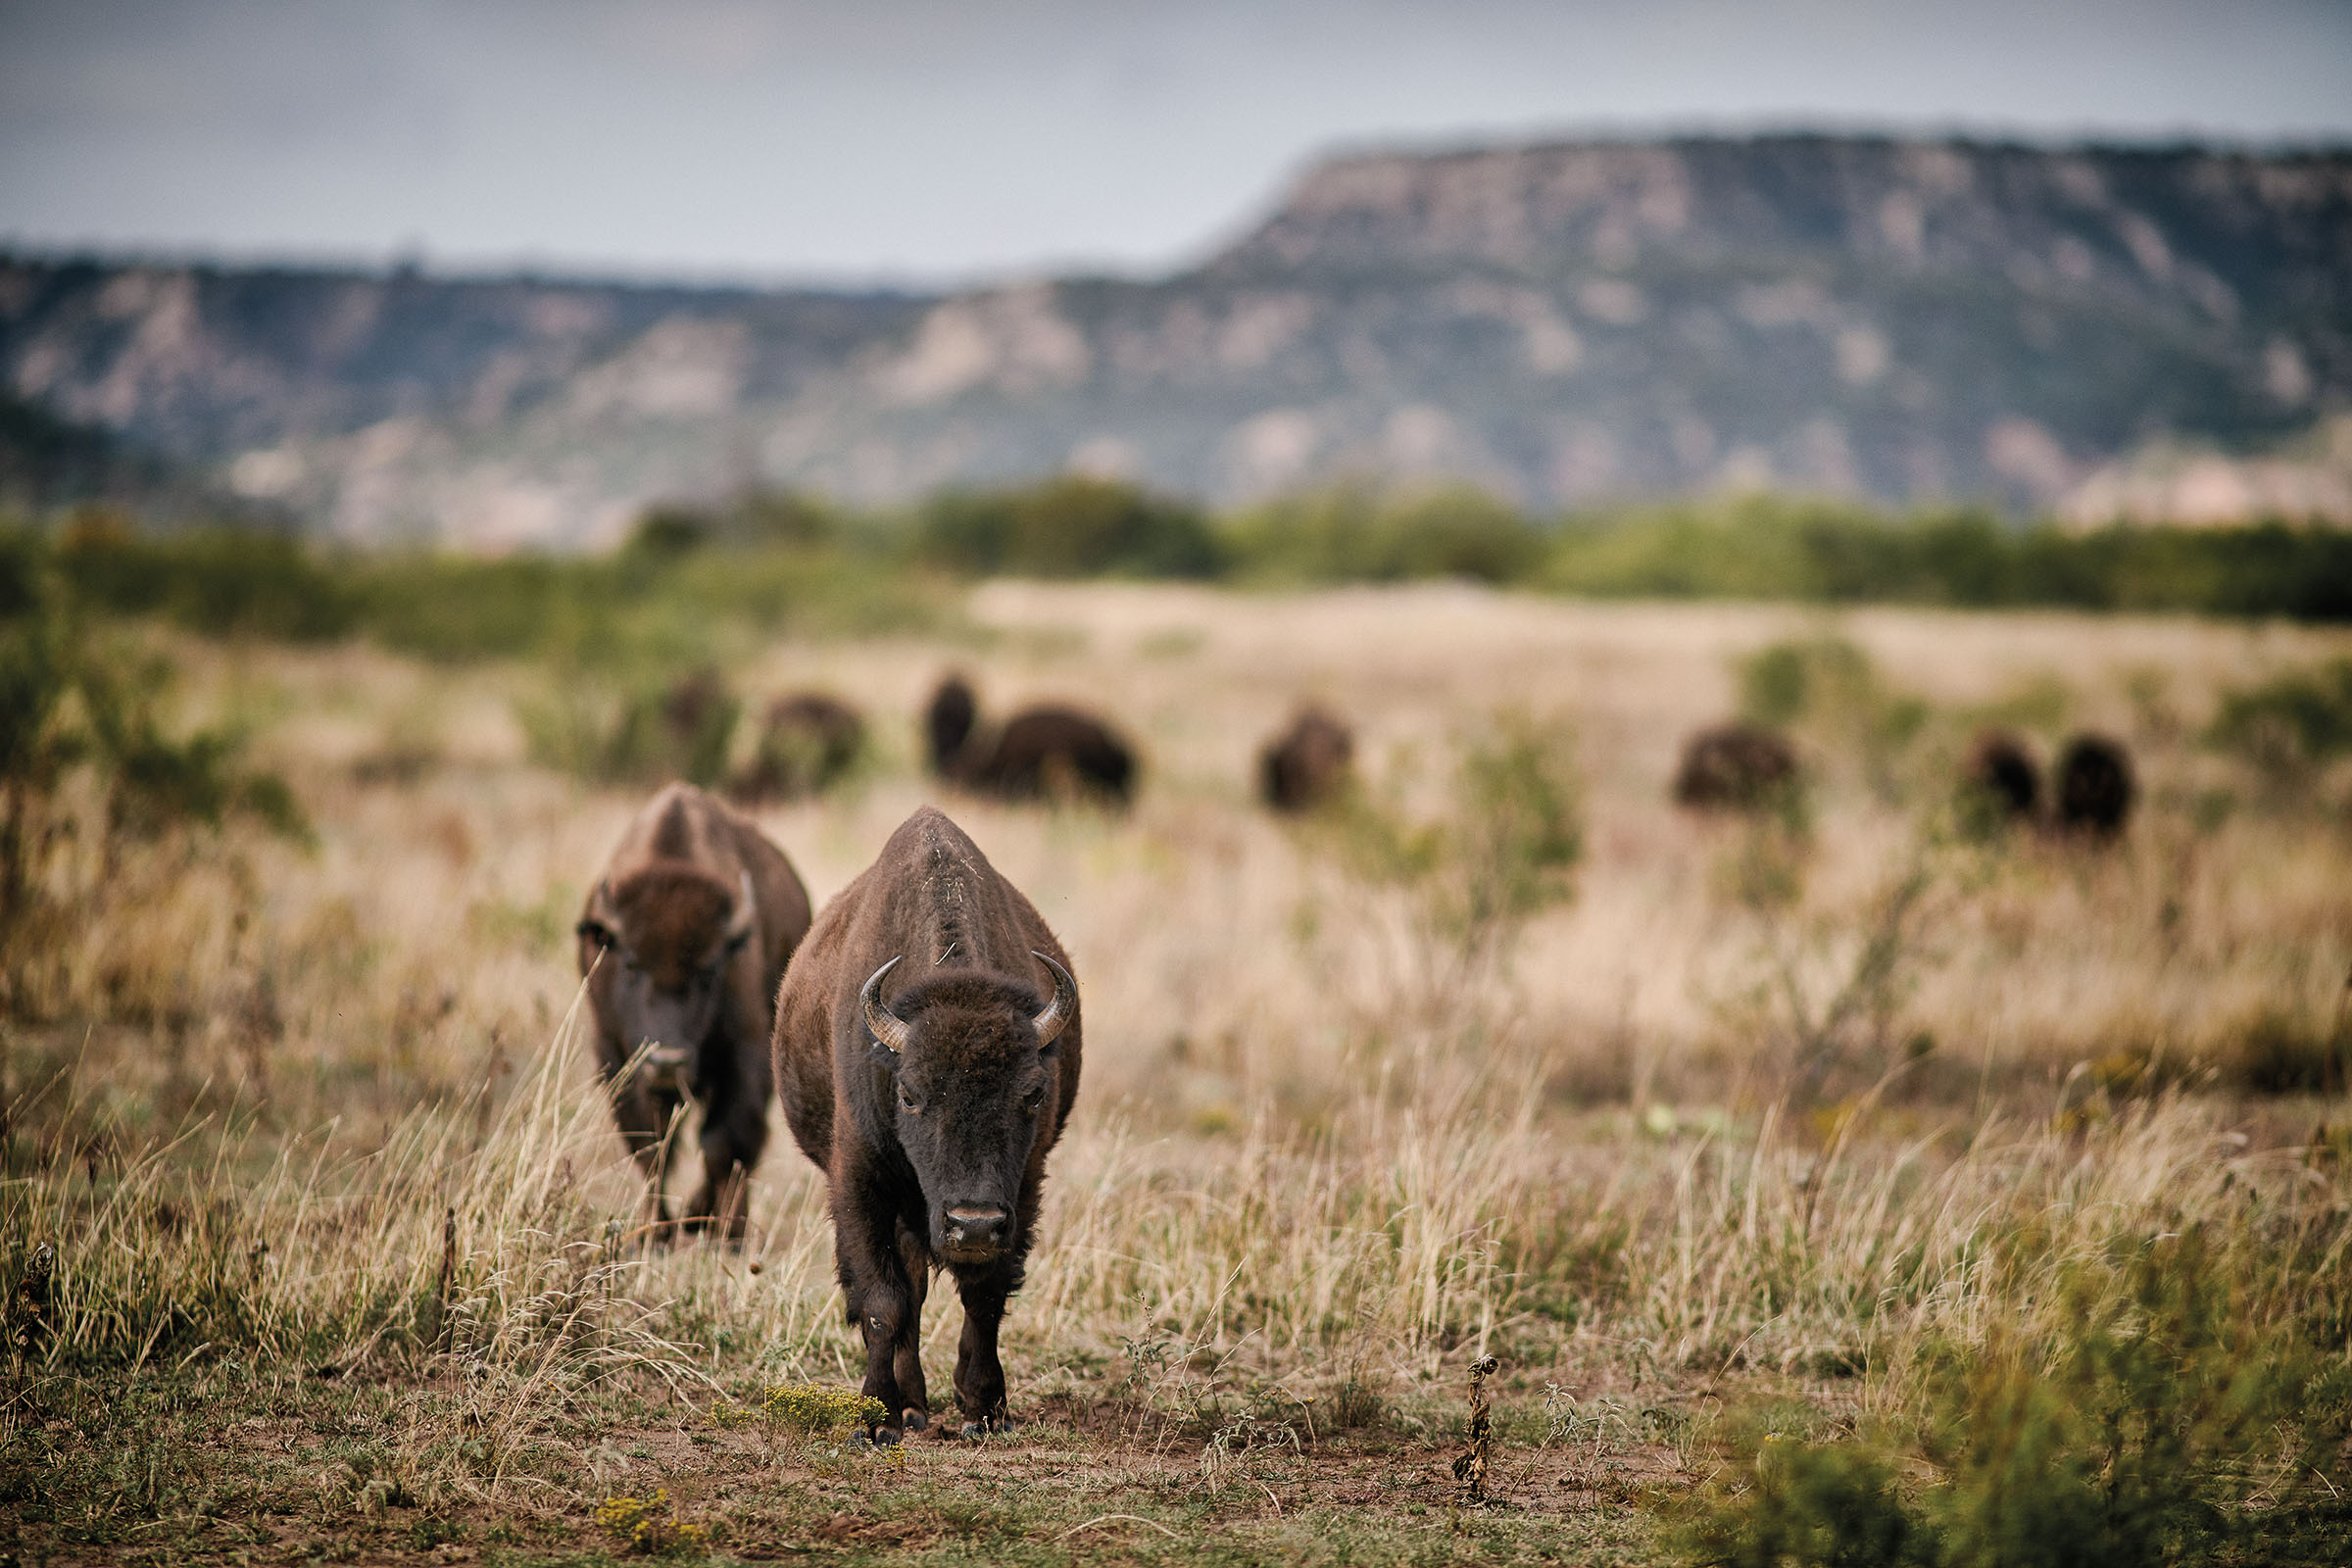 A herd of bison walk through scrub grasses and short trees. The bison are dark brown with horns.